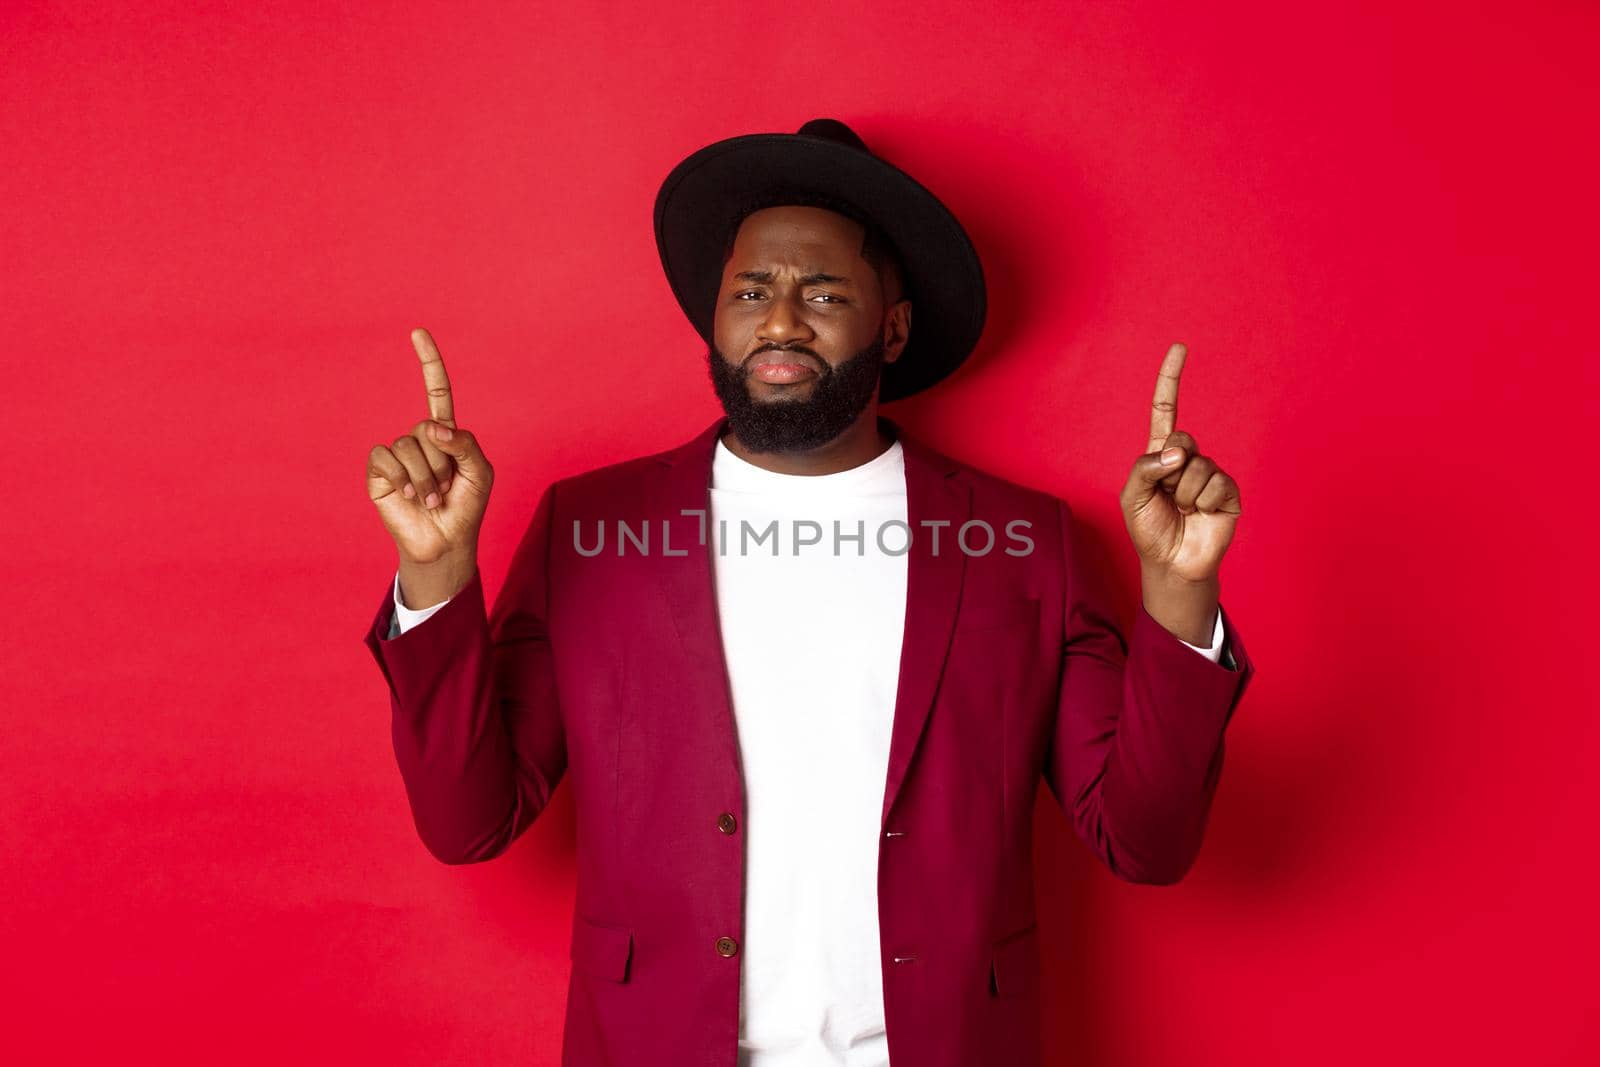 Winter holidays and shopping concept. Skeptical Black man grimasing and showing dislike, pointing fingers up at bad offer, standing over red background.